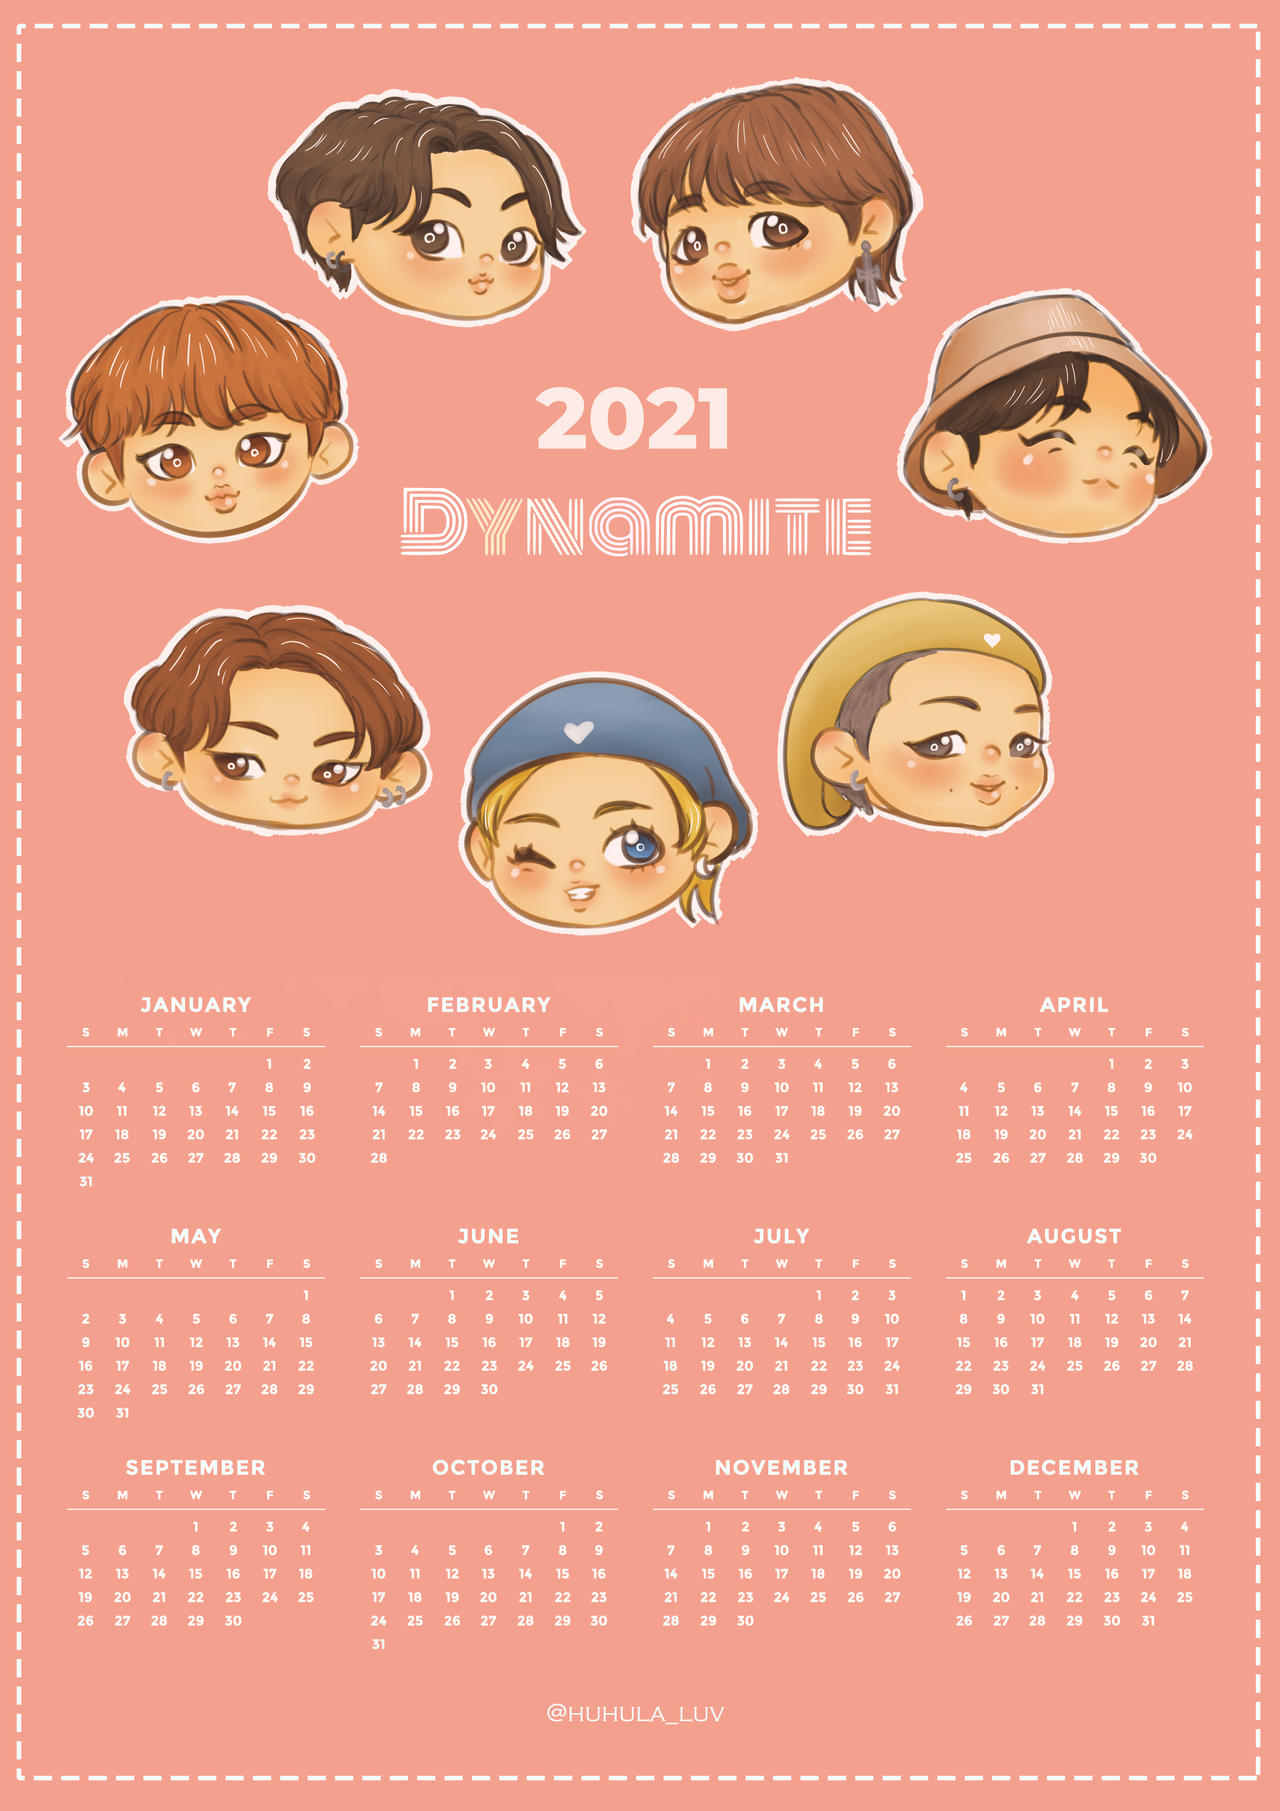 free printable calendar for army bts dynamite by huhulaluv on deviantart